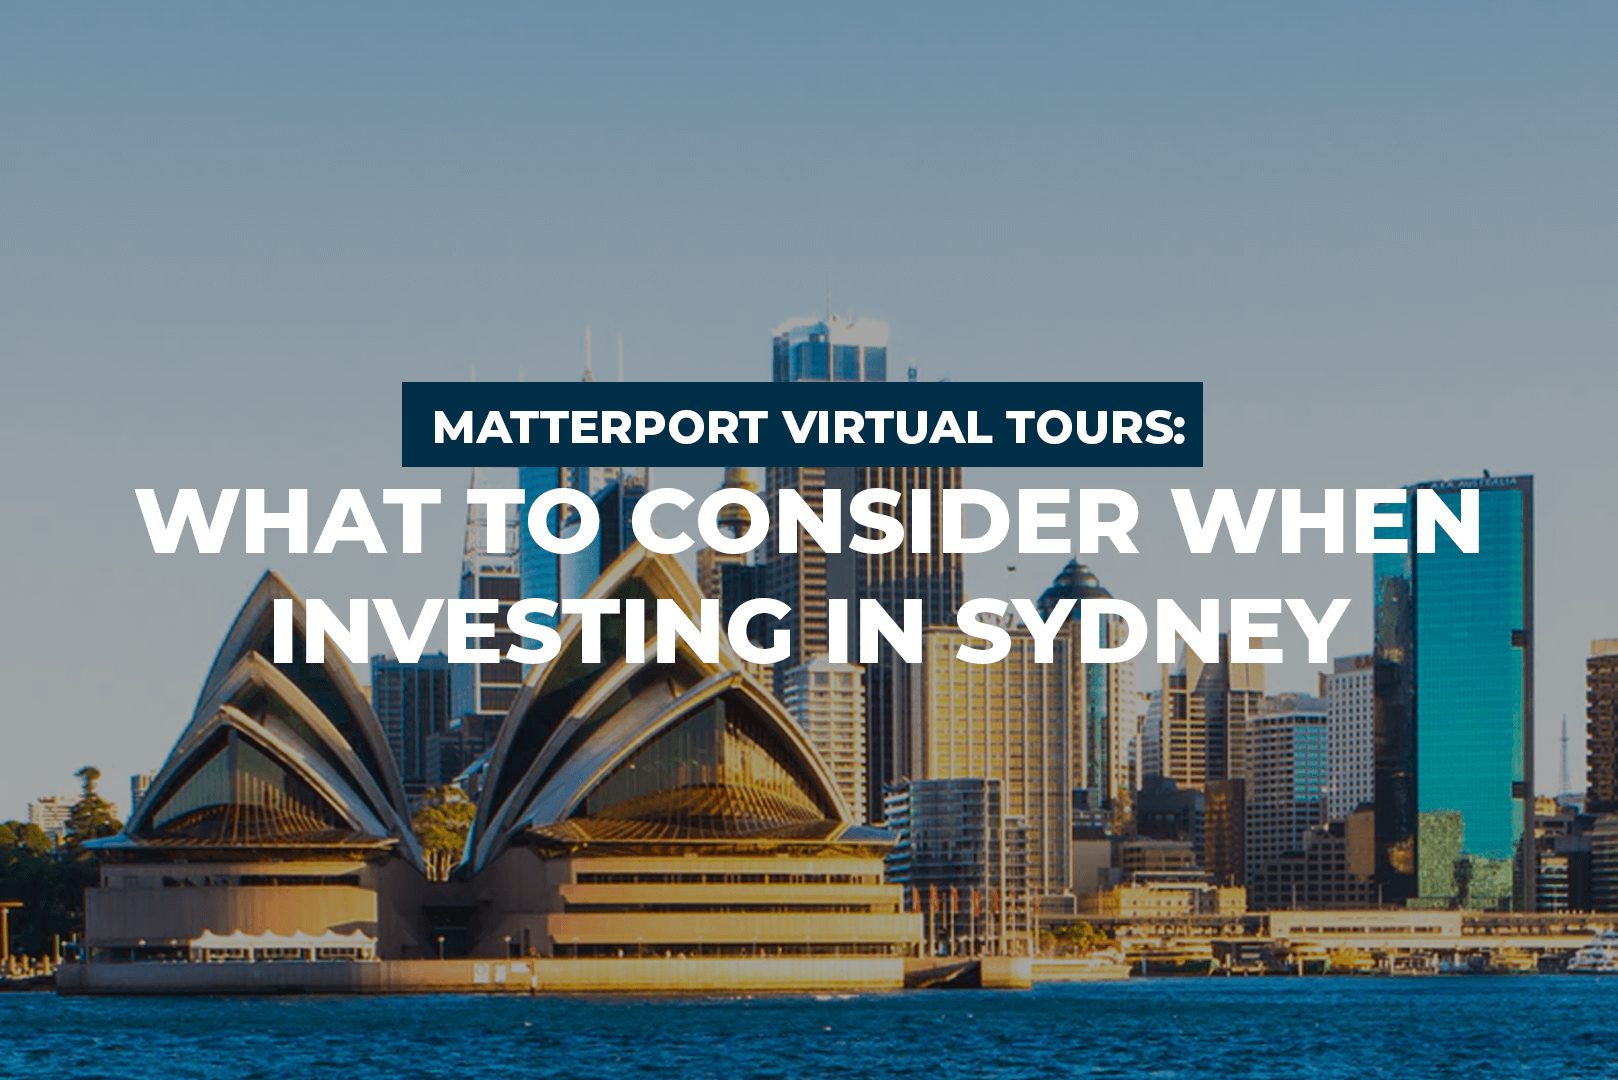 Matterport Virtual Tours: What To Consider When Investing In Sydney